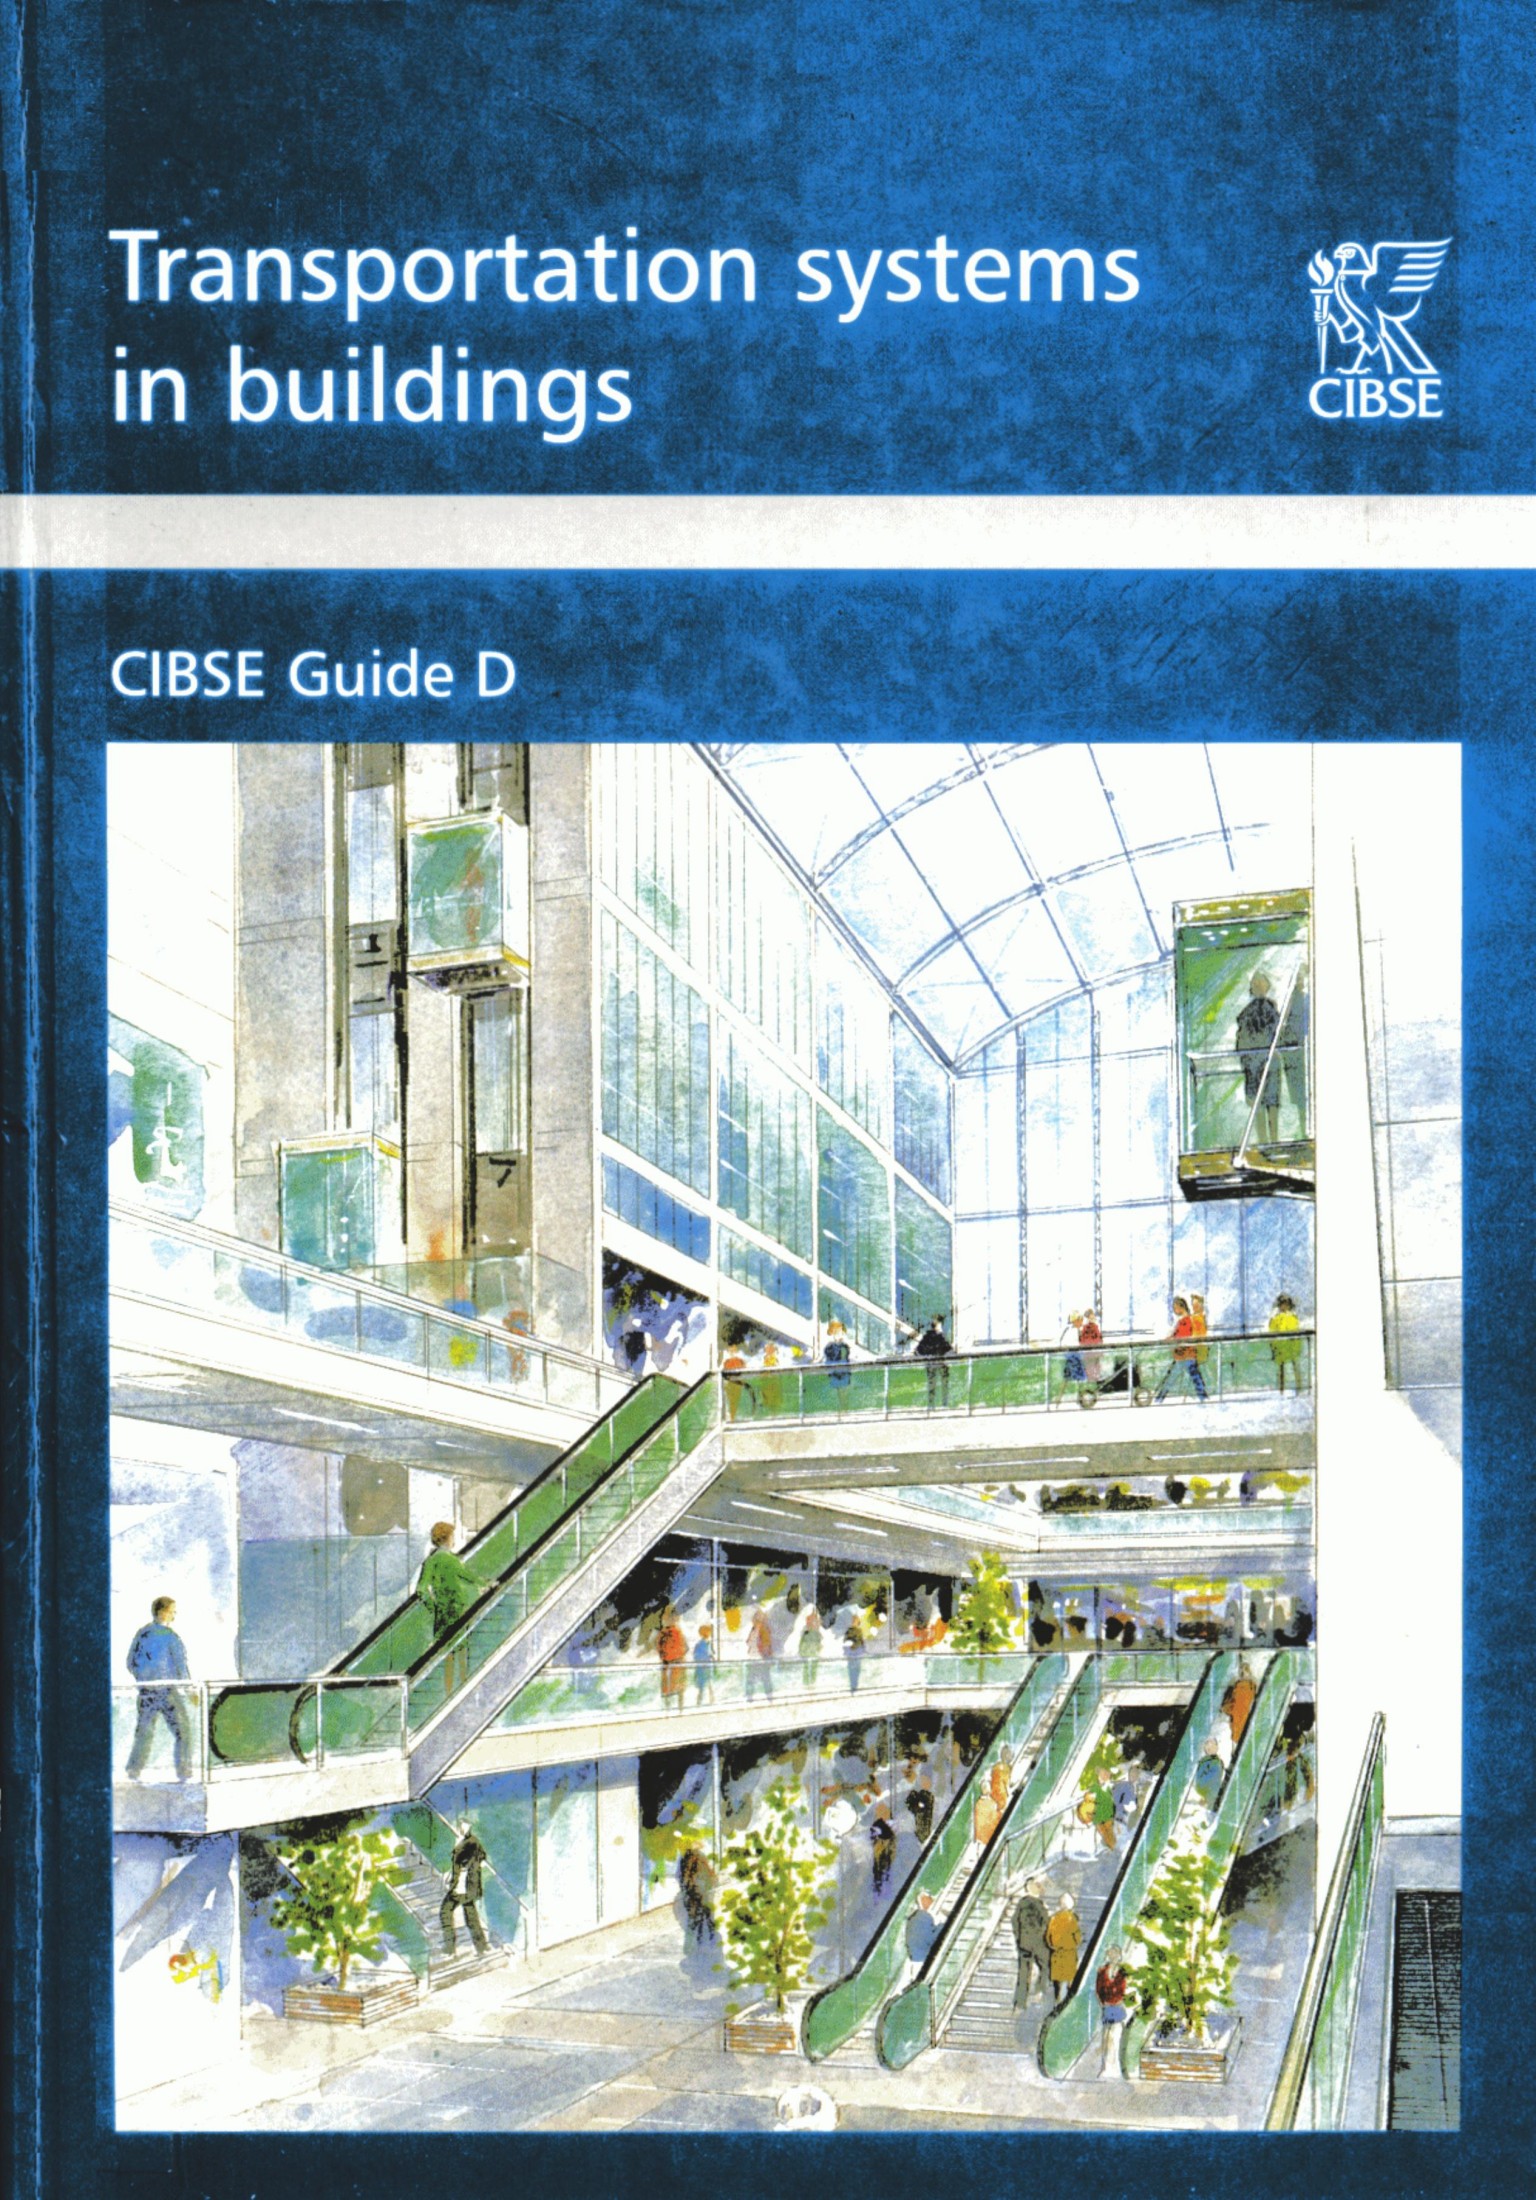 Guide D Steering Committee CIBSE Guide D Transportation Systems in Buildings  2000